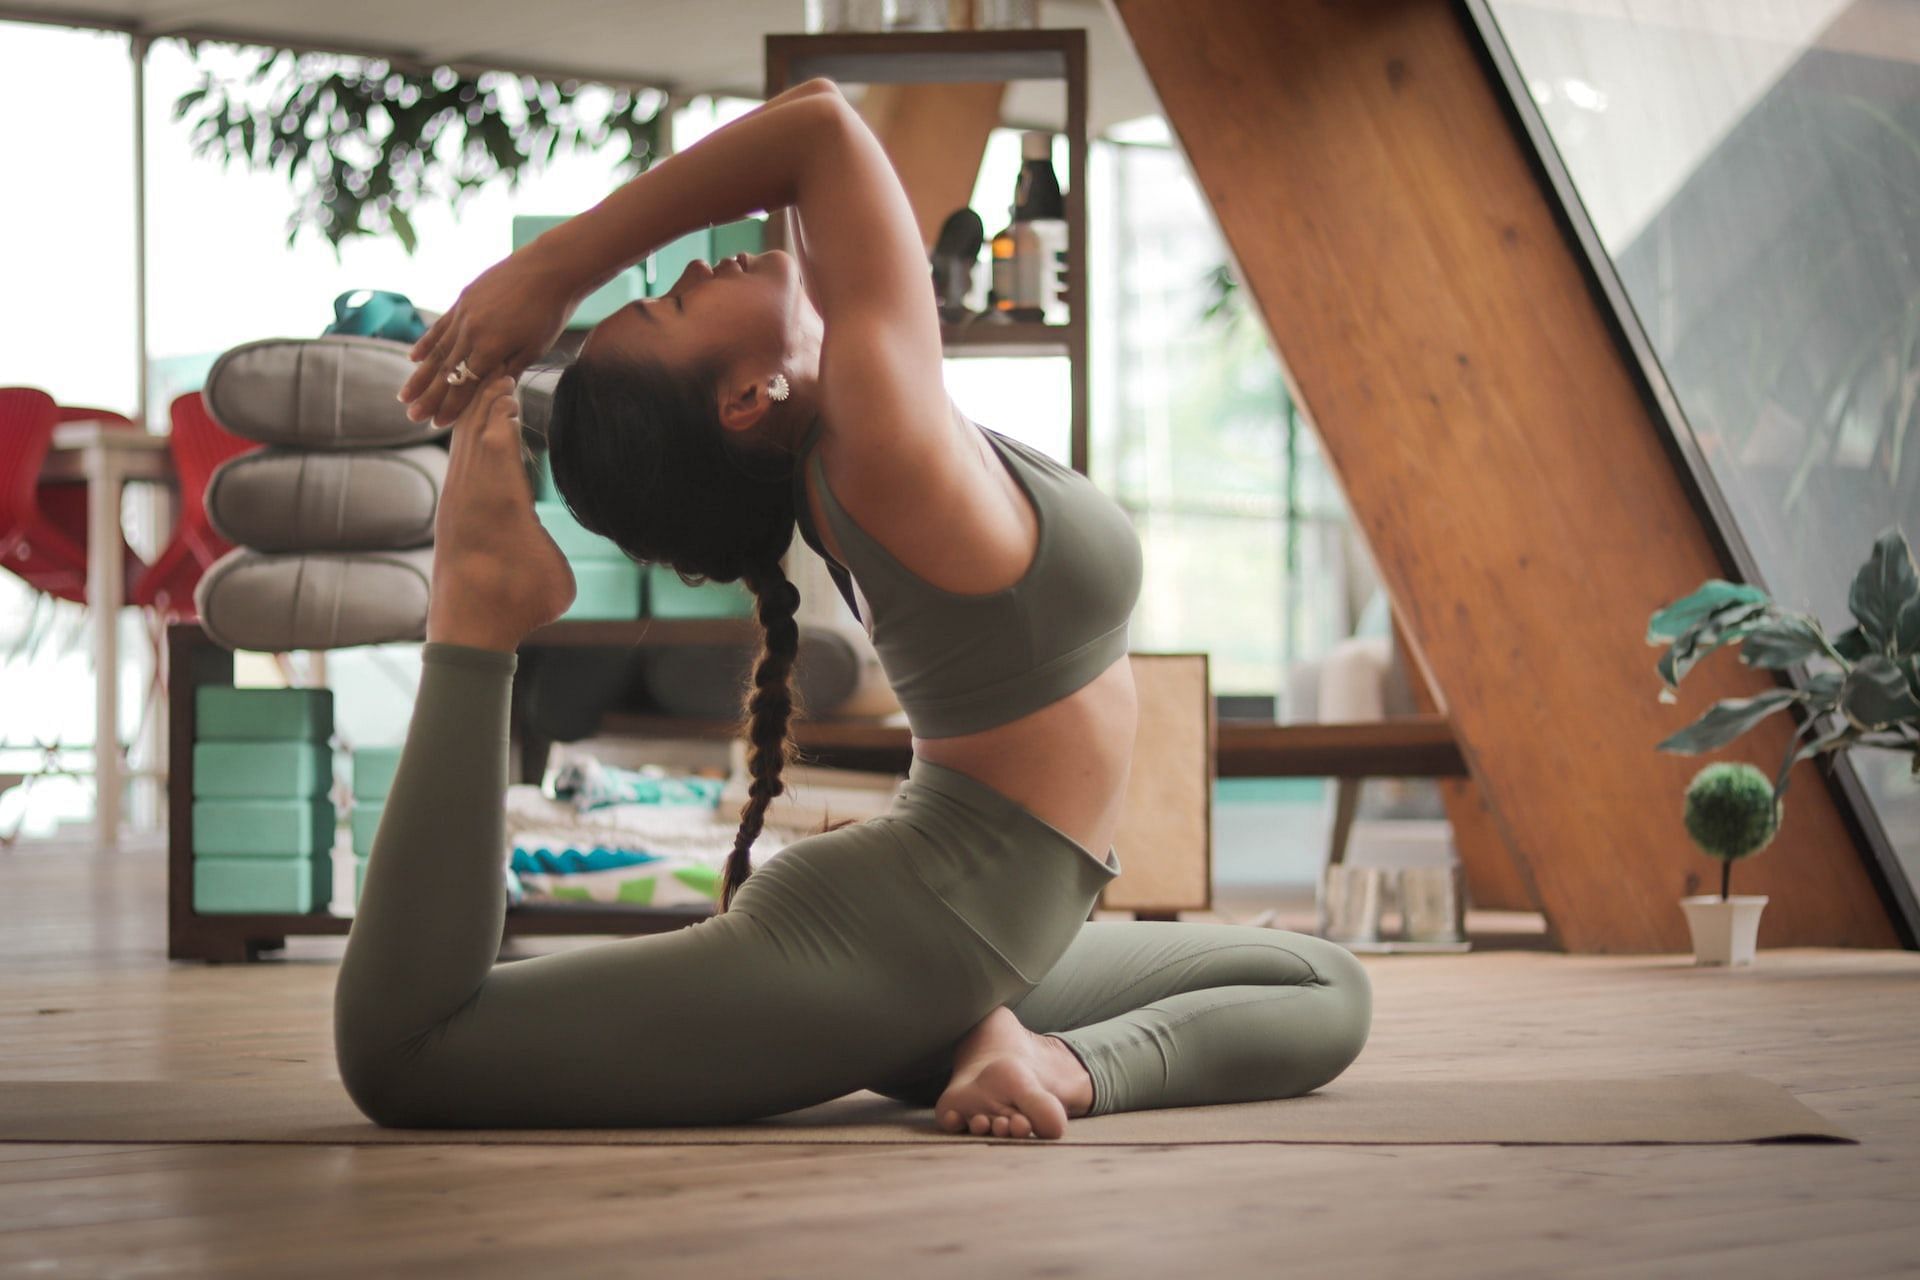 Yoga offers several physical and mental health benefits. (Photo via Unsplash/Carl Barcelo)